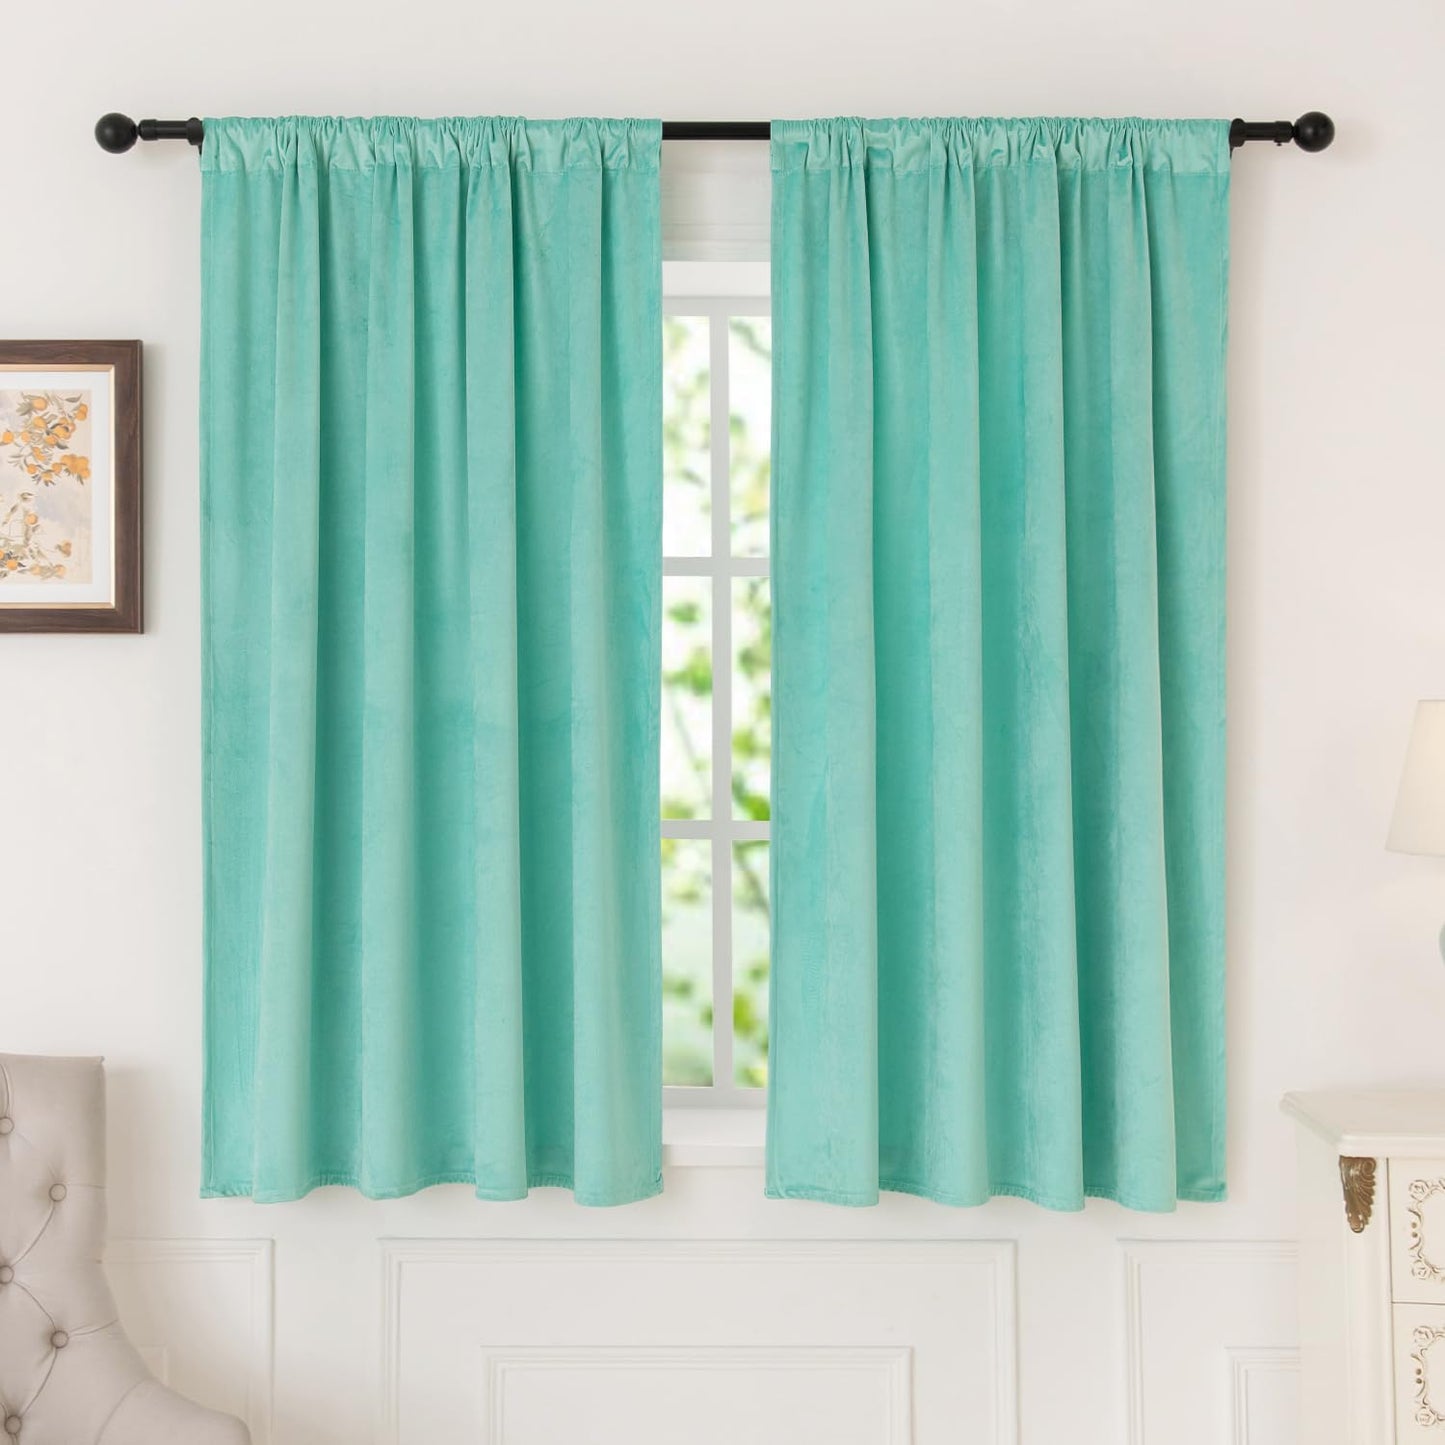 Nanbowang Green Velvet Curtains 63 Inches Long Dark Green Light Blocking Rod Pocket Window Curtain Panels Set of 2 Heat Insulated Curtains Thermal Curtain Panels for Bedroom  nanbowang Aqua 52"X63" 